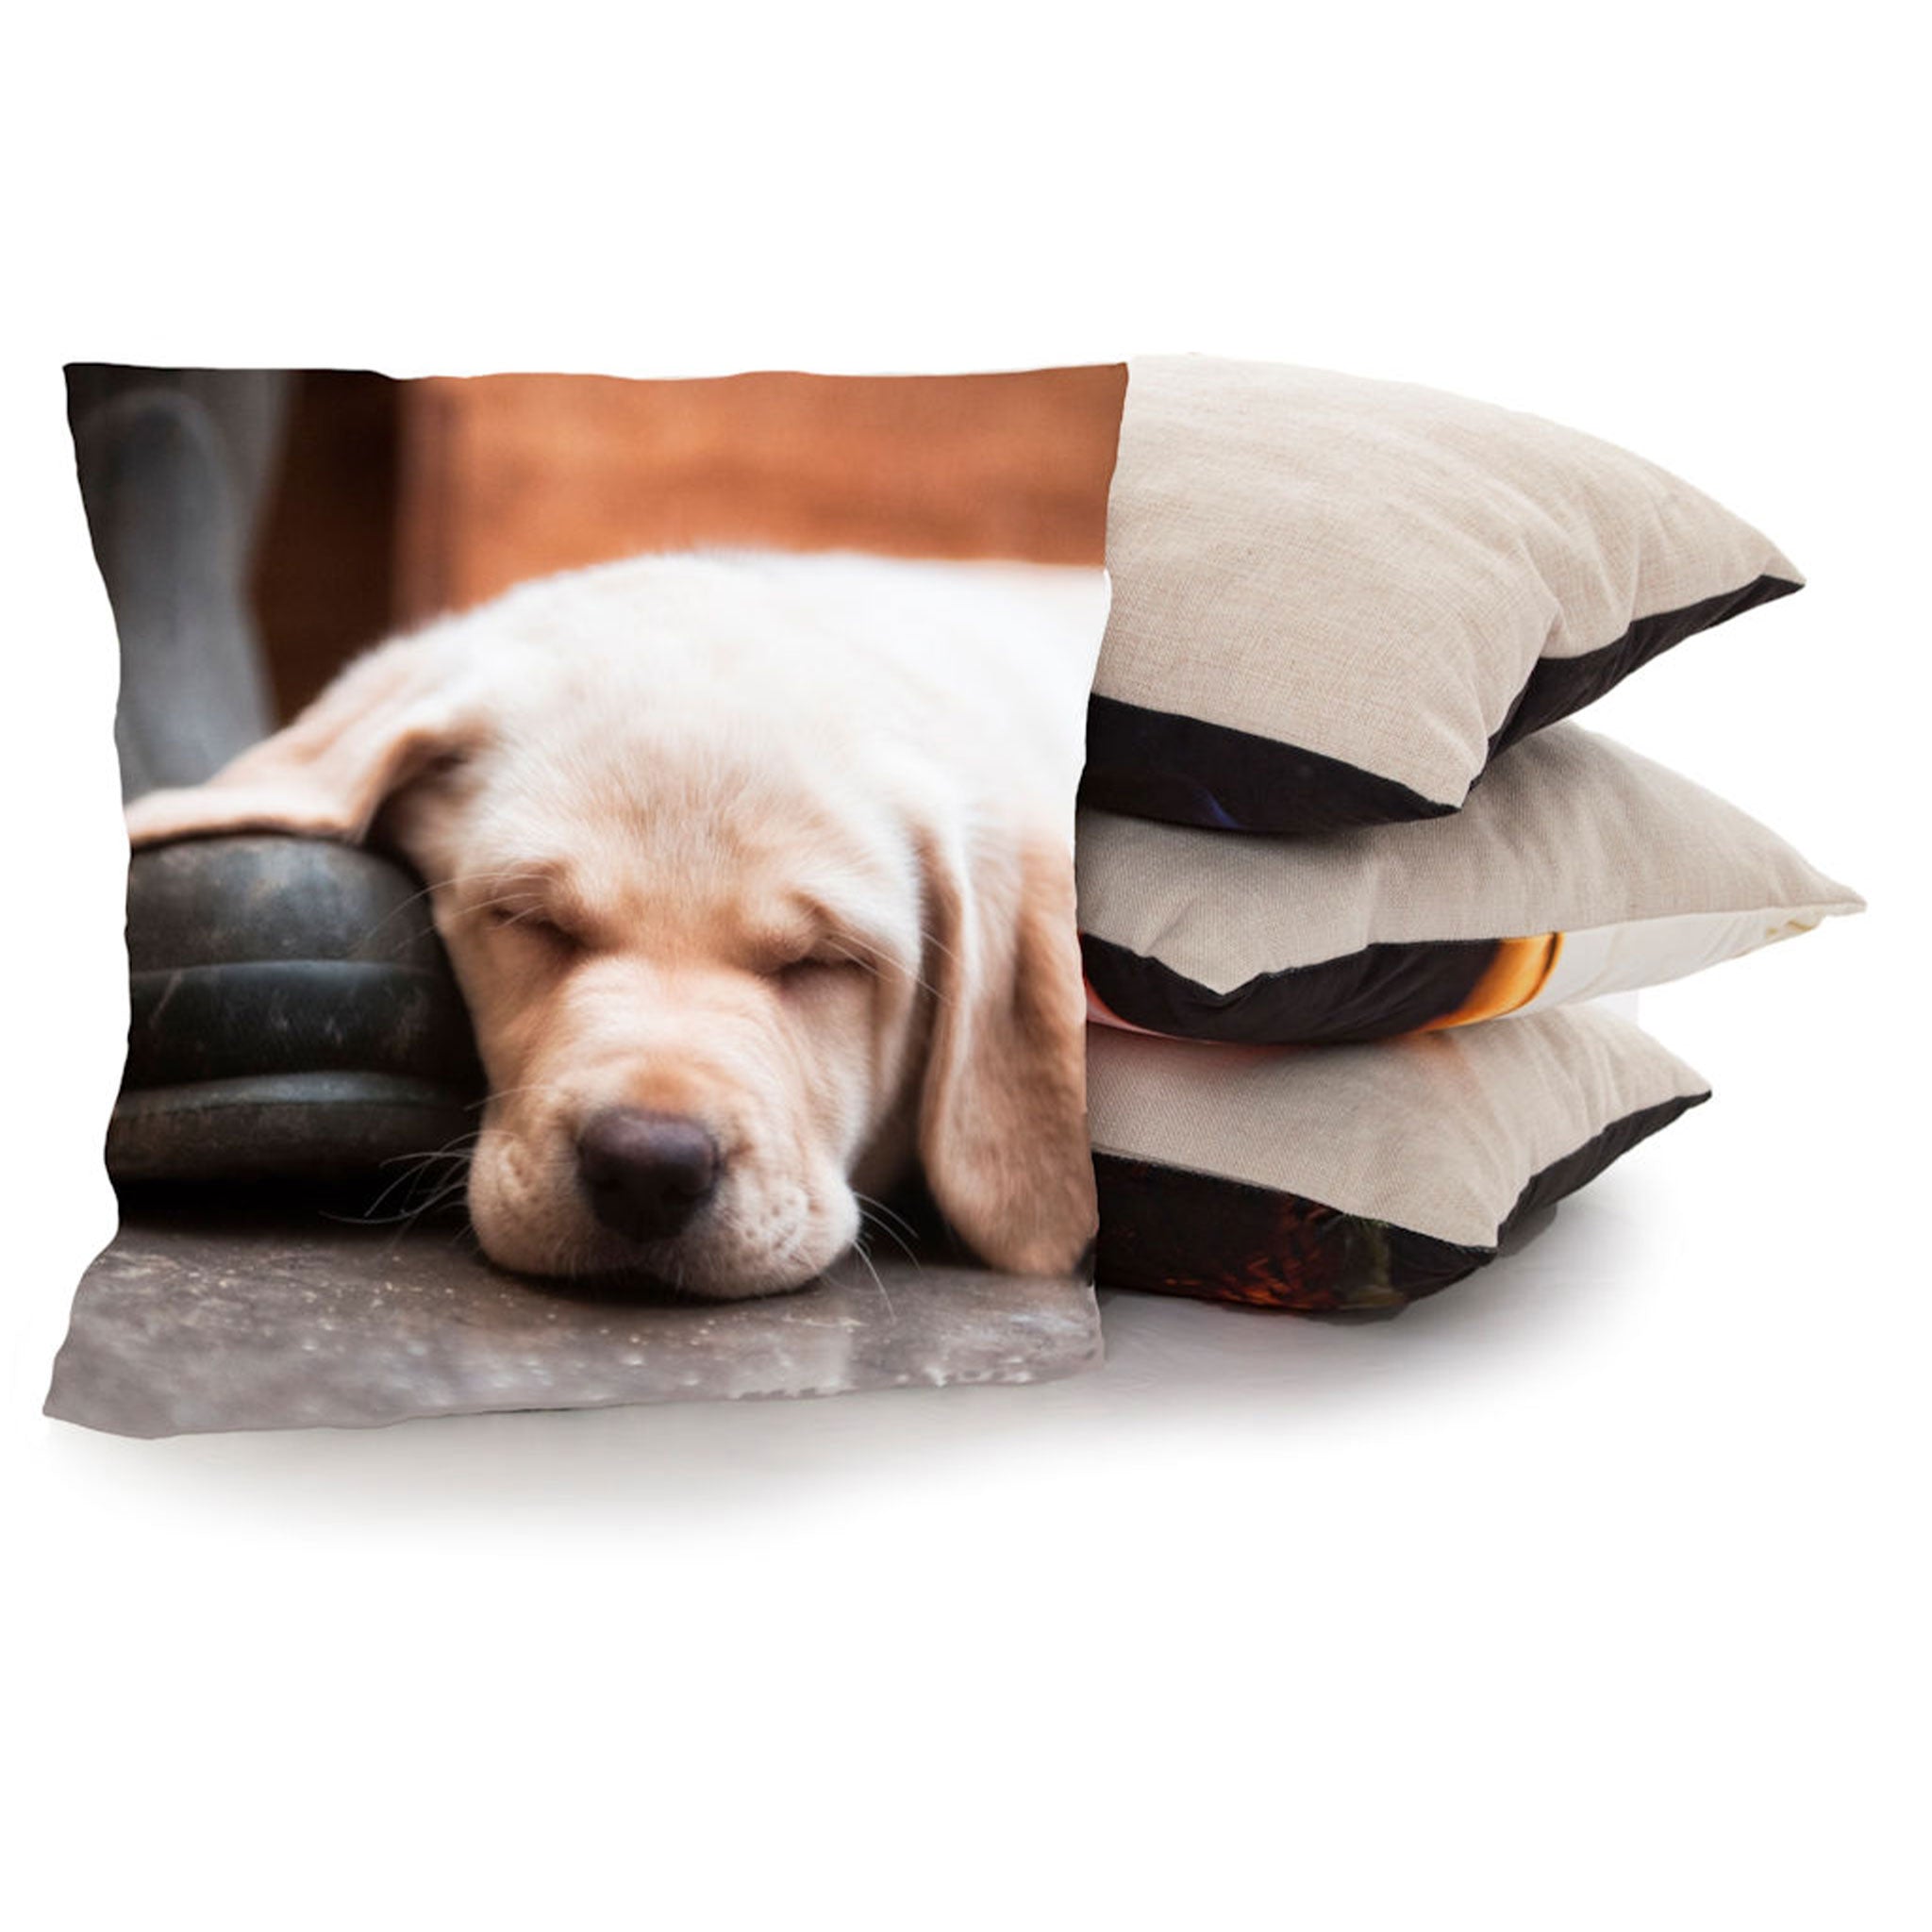 A cushion with an image of a sleeping Labrador Puppy is propped up against a stack of three cushions.